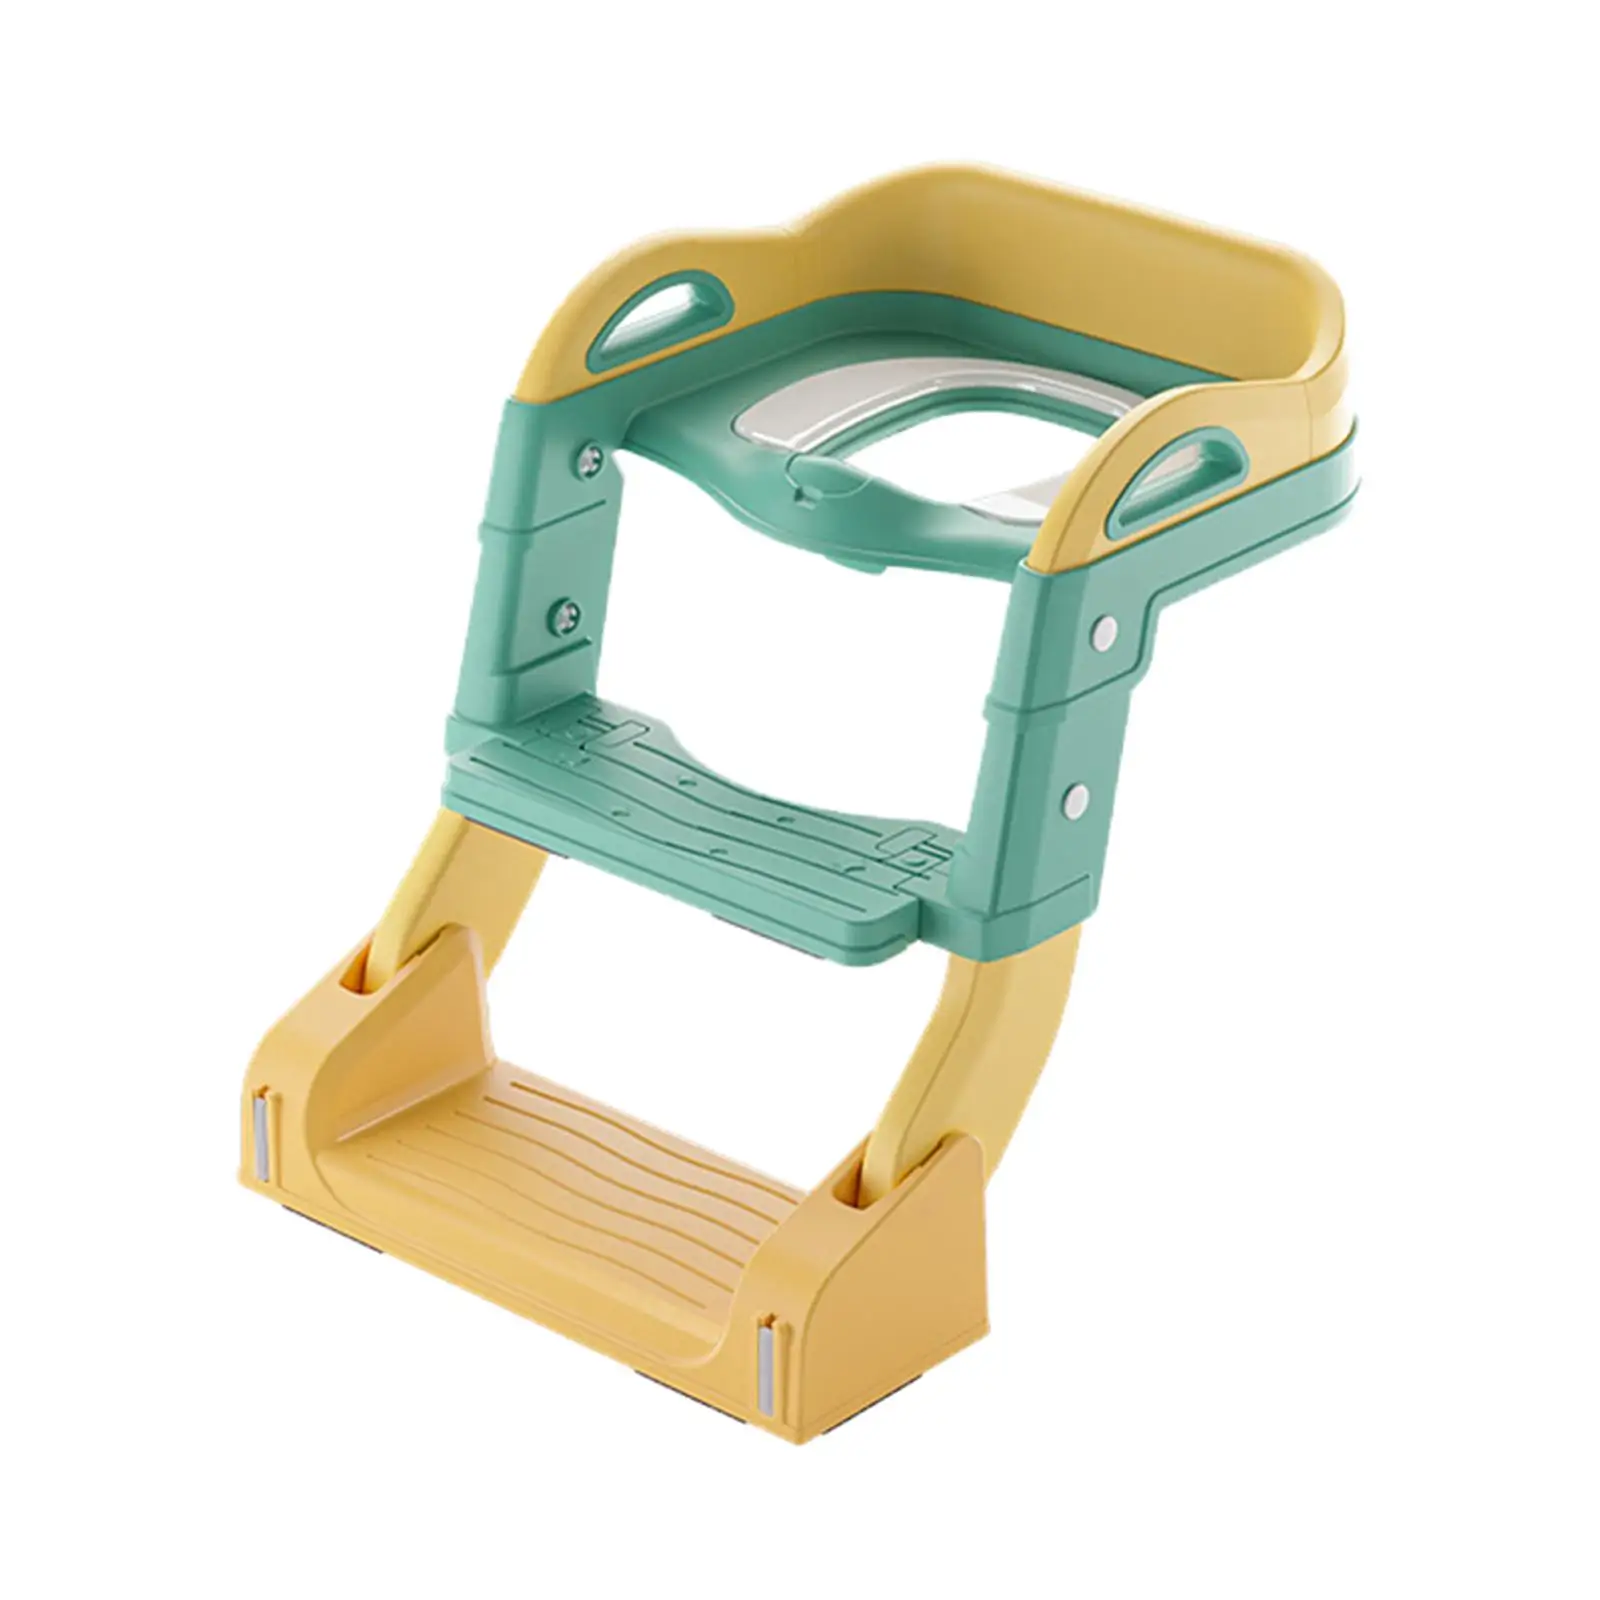 Kids Toilet Training Seat with Ladder Baby Infant Potty Child Toilet Trainer Seat